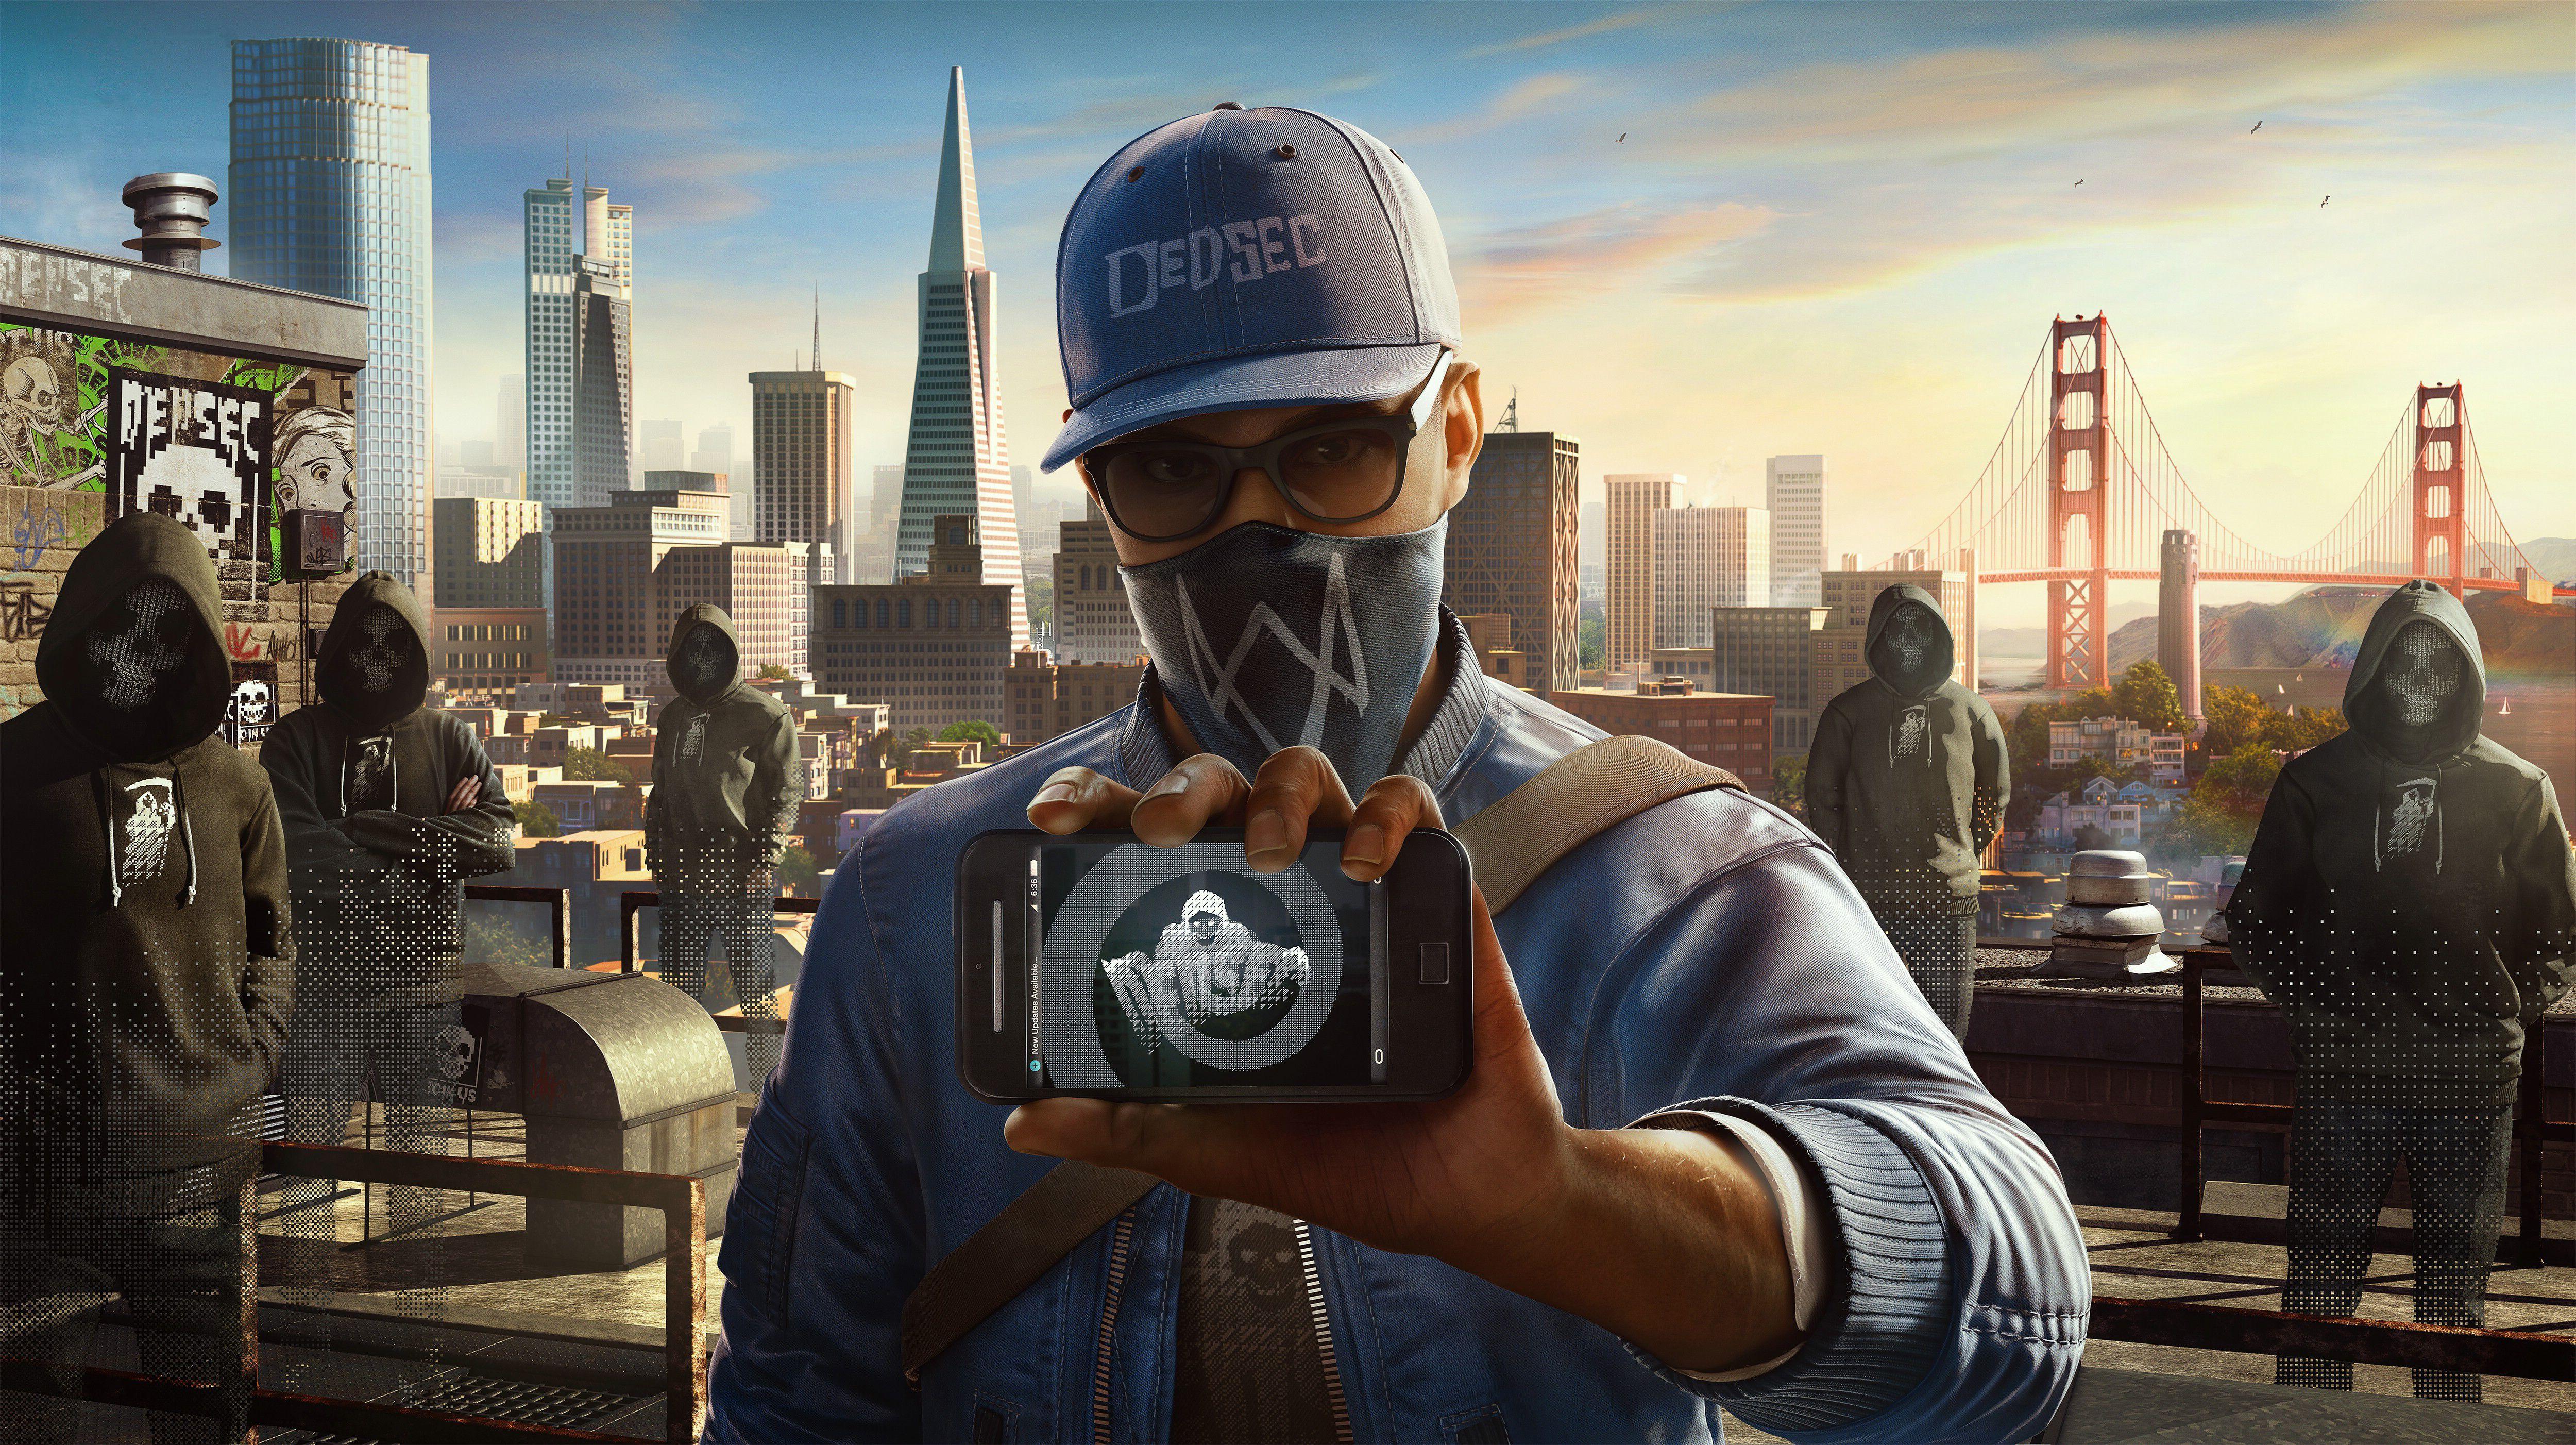 Watch Dogs 2 Hd Wallpapers Wallpaper Cave